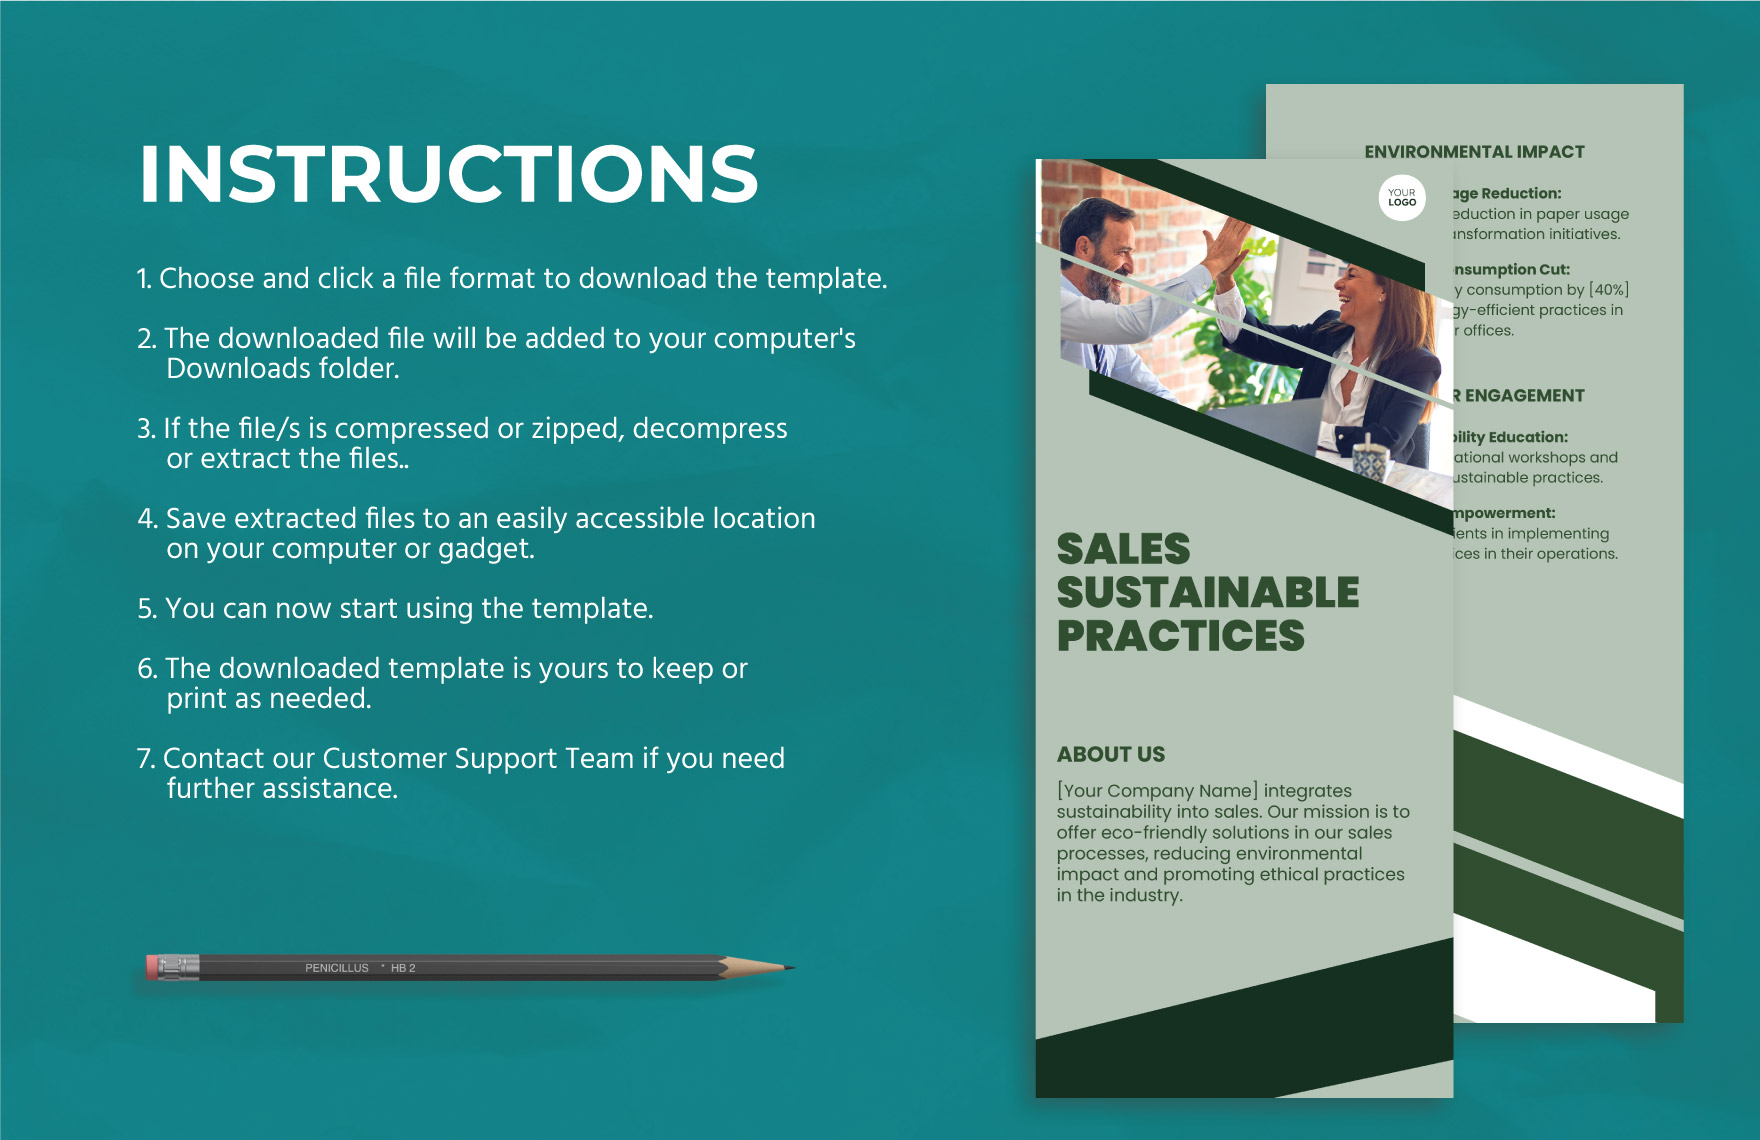 Sales Sustainable Practices Rack Card Template